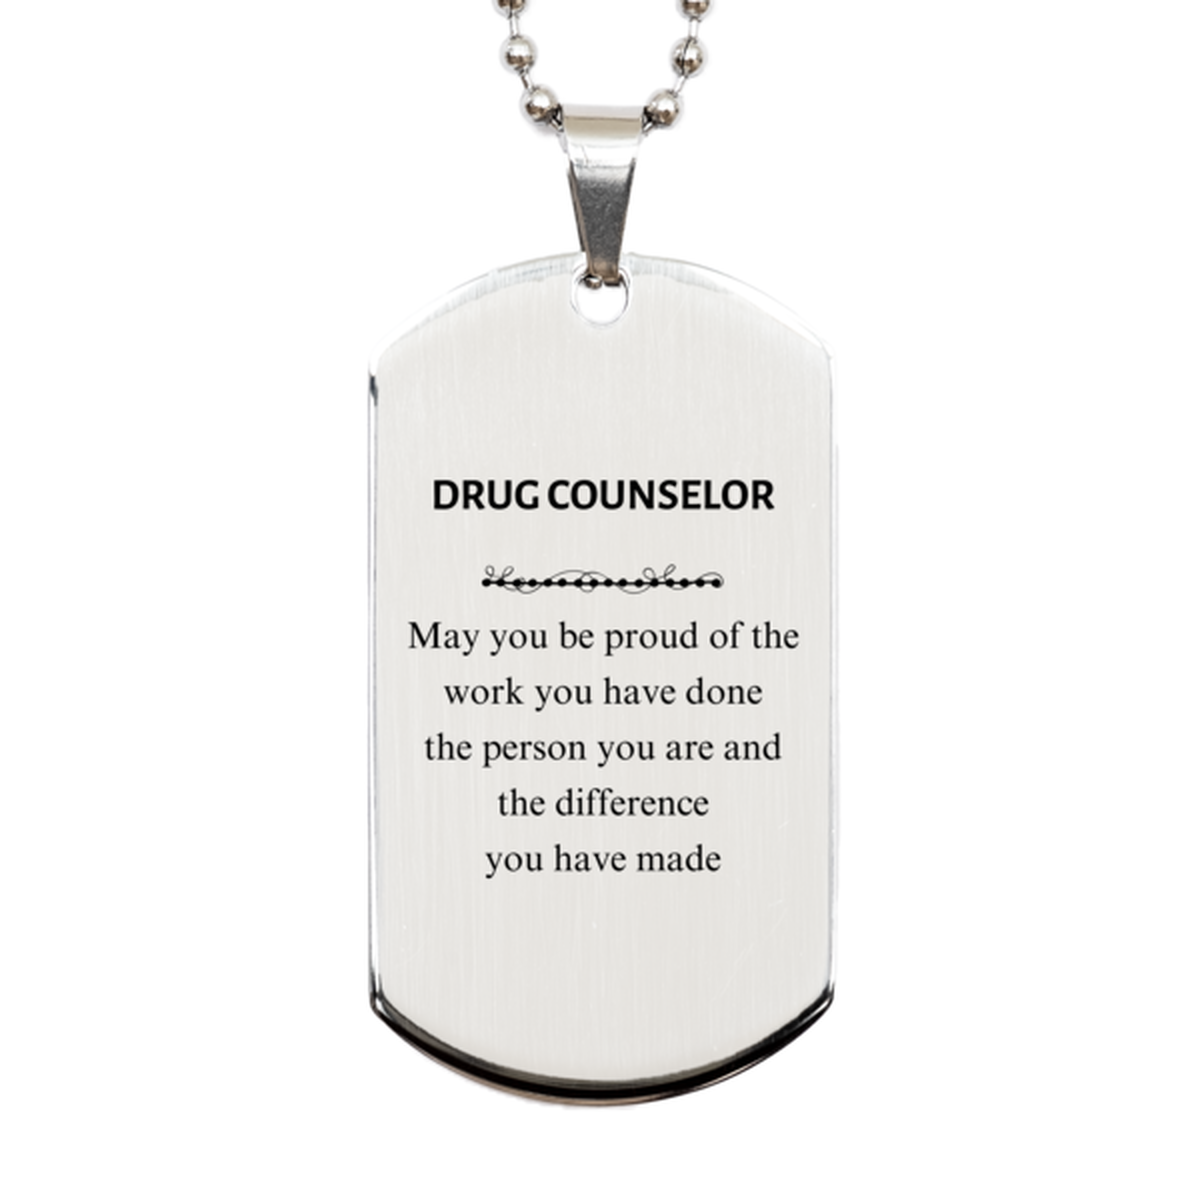 Drug Counselor May you be proud of the work you have done, Retirement Drug Counselor Silver Dog Tag for Colleague Appreciation Gifts Amazing for Drug Counselor